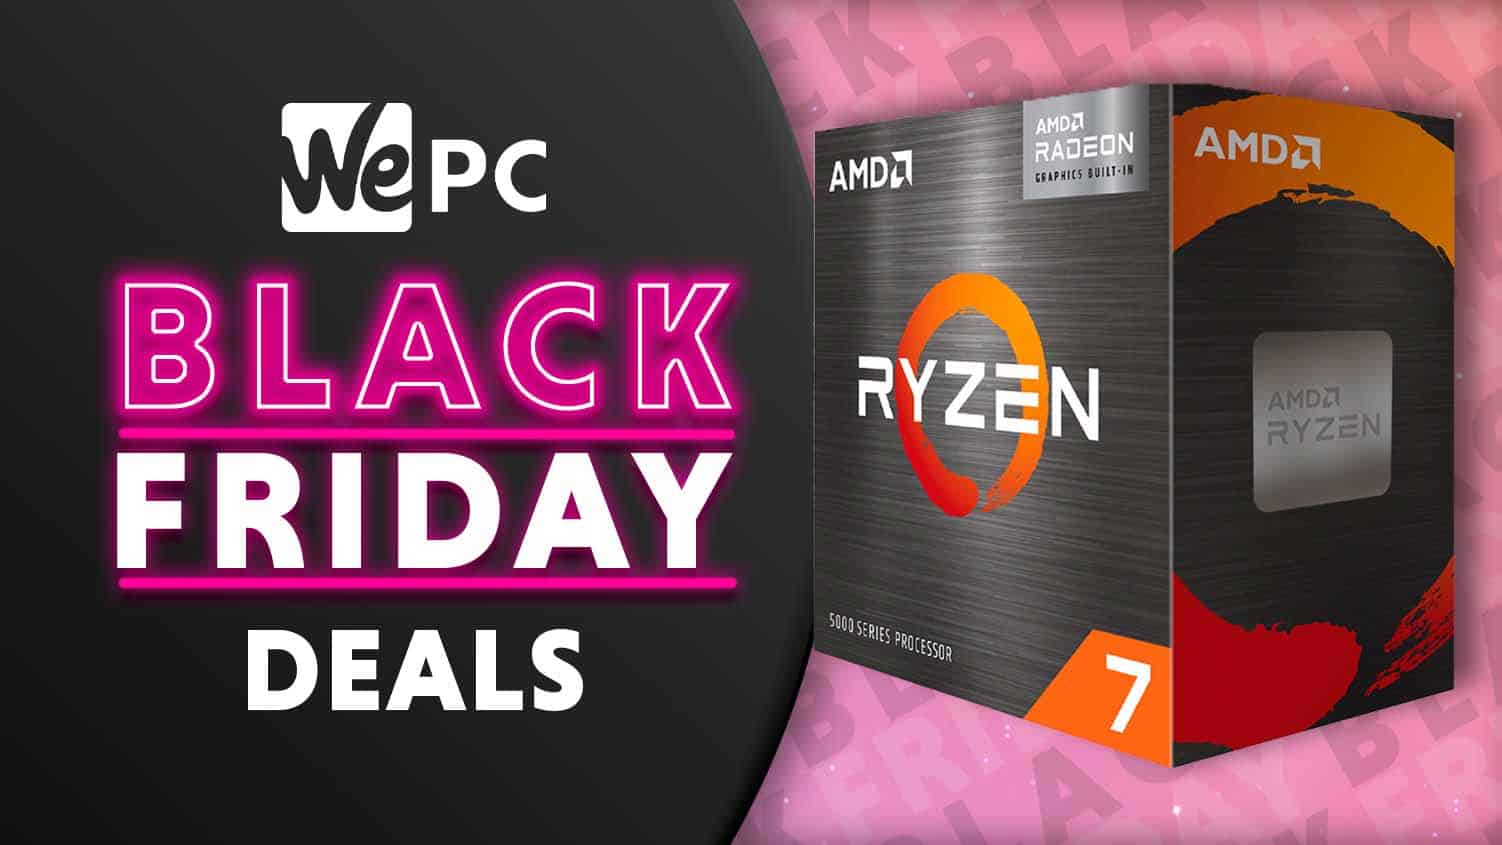 Save 10% on AMD Ryzen 7 5700G CPU early Black Friday Deal